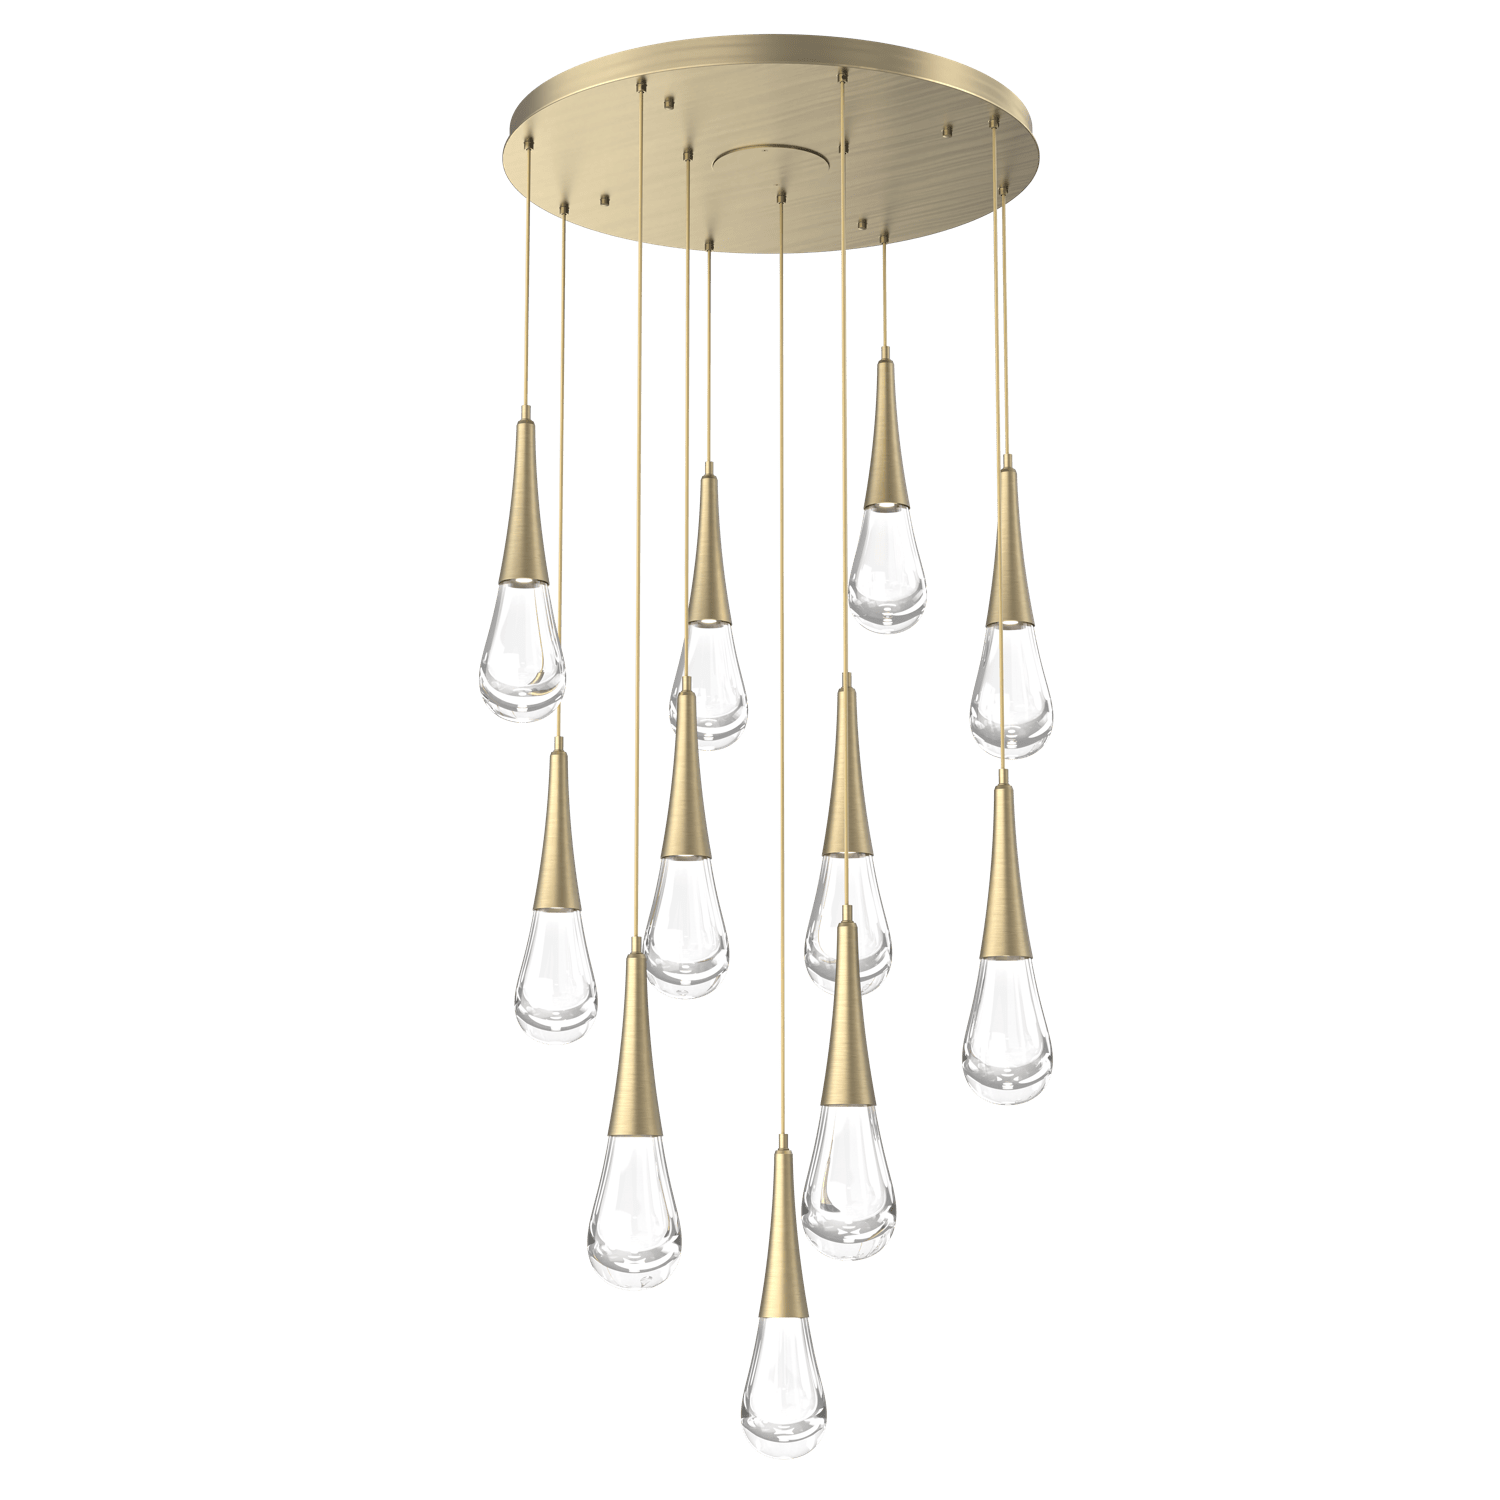 CHB0078-11-HB-Hammerton-Studio-Raindrop-11-light-round-pendant-chandelier-with-heritage-brass-finish-and-clear-blown-glass-shades-and-LED-lamping